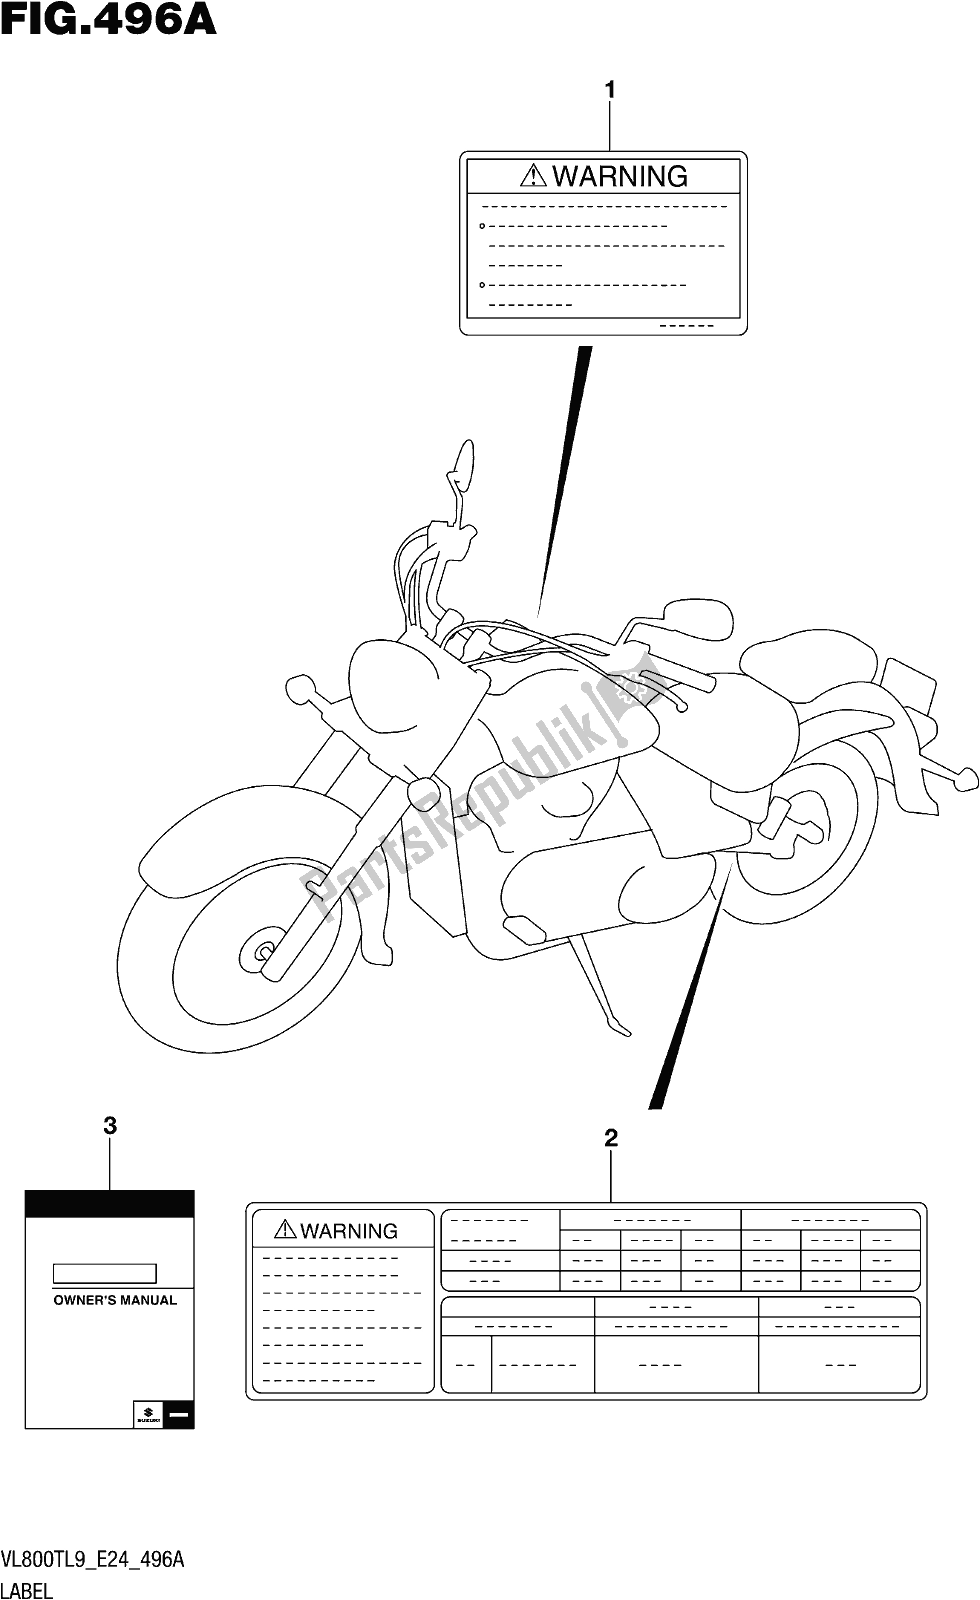 All parts for the Fig. 496a Label of the Suzuki VL 800T 2019